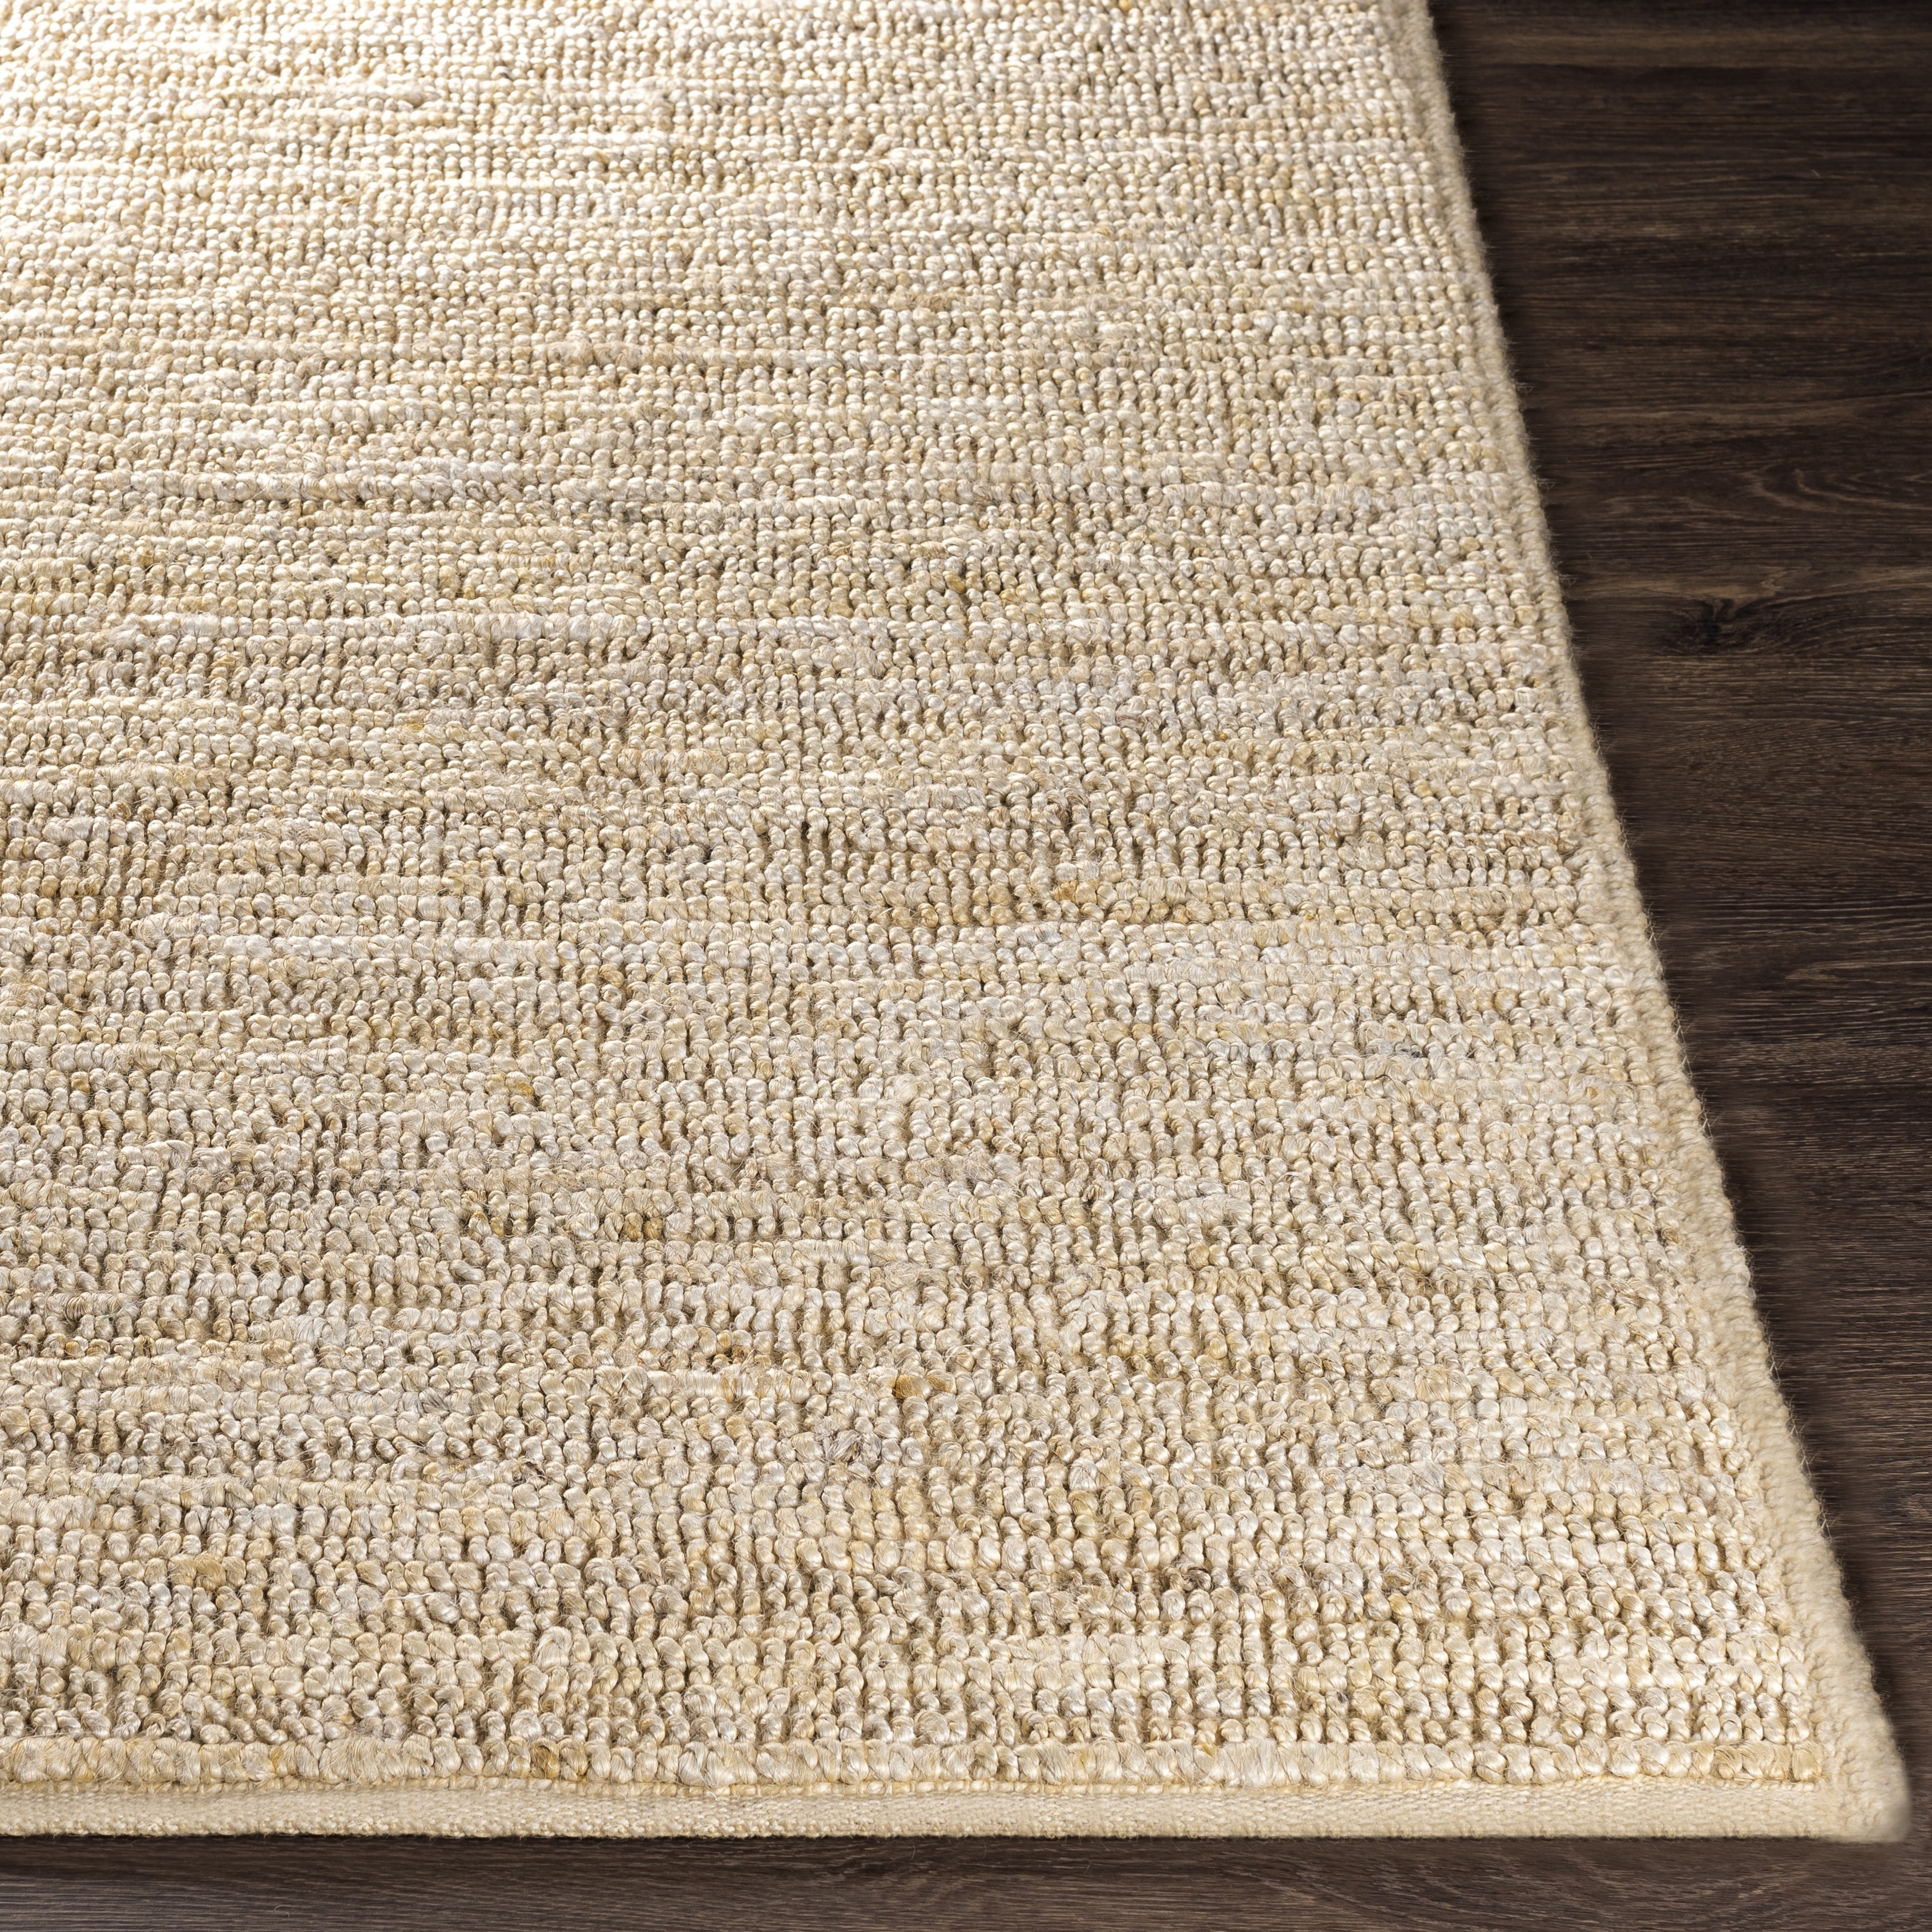 Continental Rug, 2' x 3' - Image 2